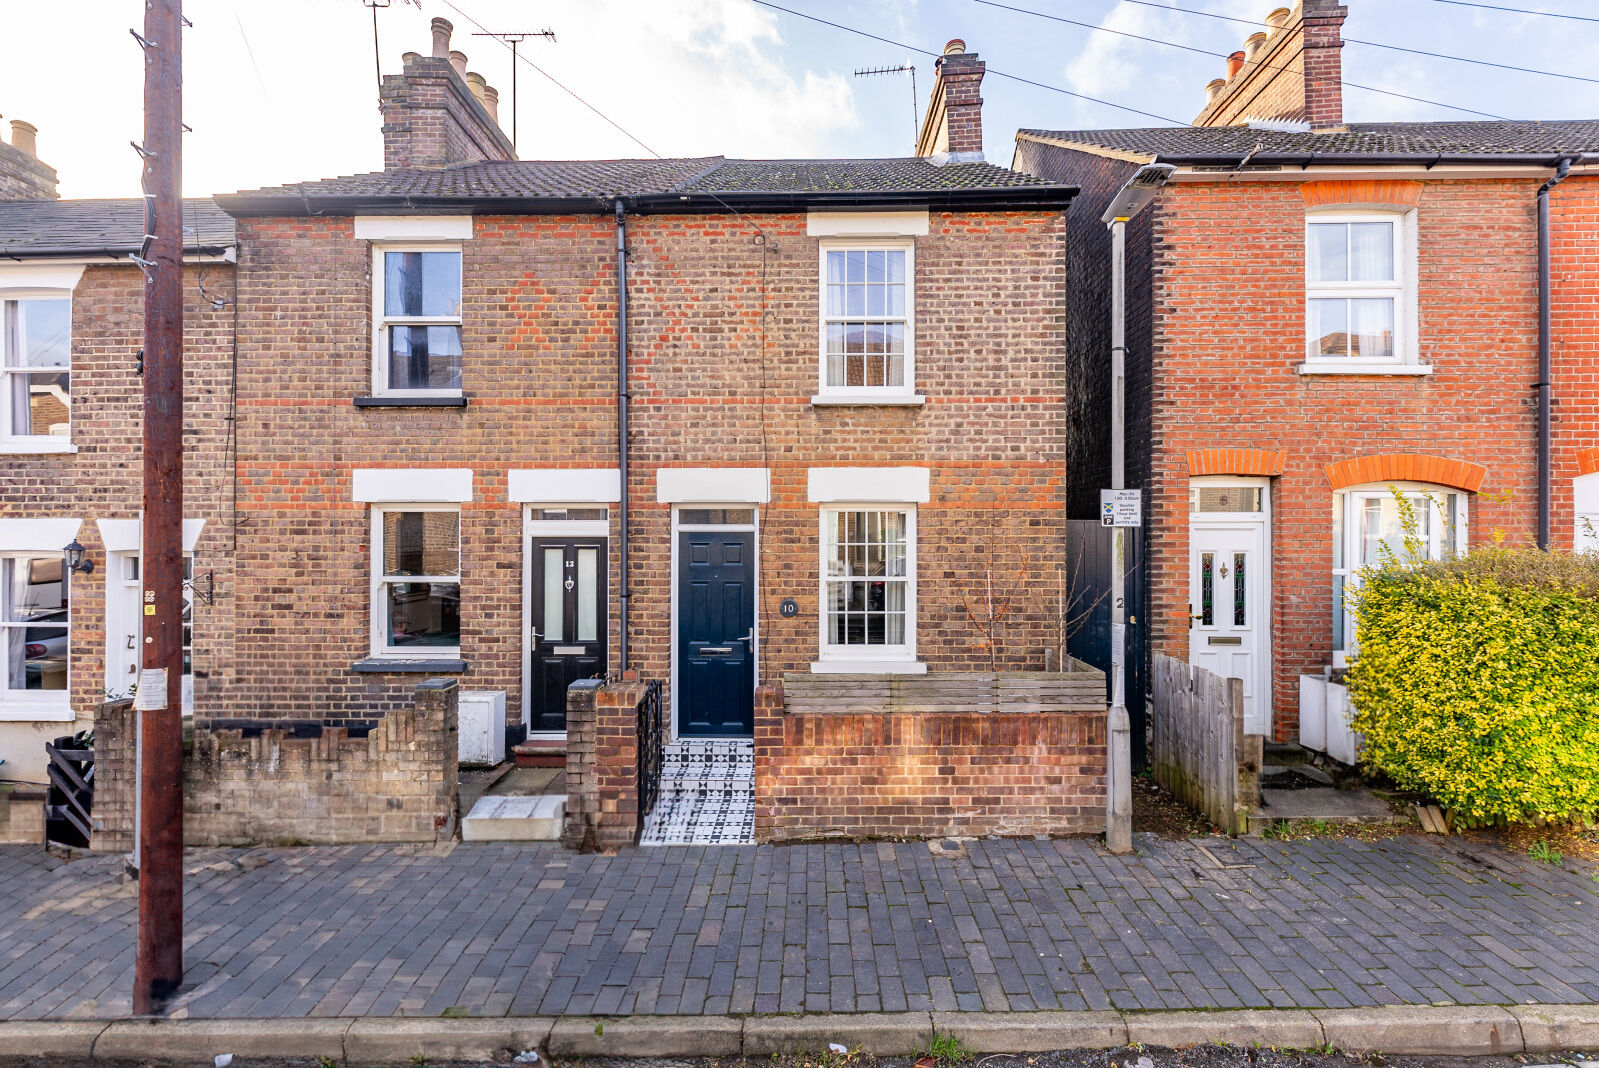 2 bedroom end terraced house for sale Albion Road, St. Albans, AL1, main image